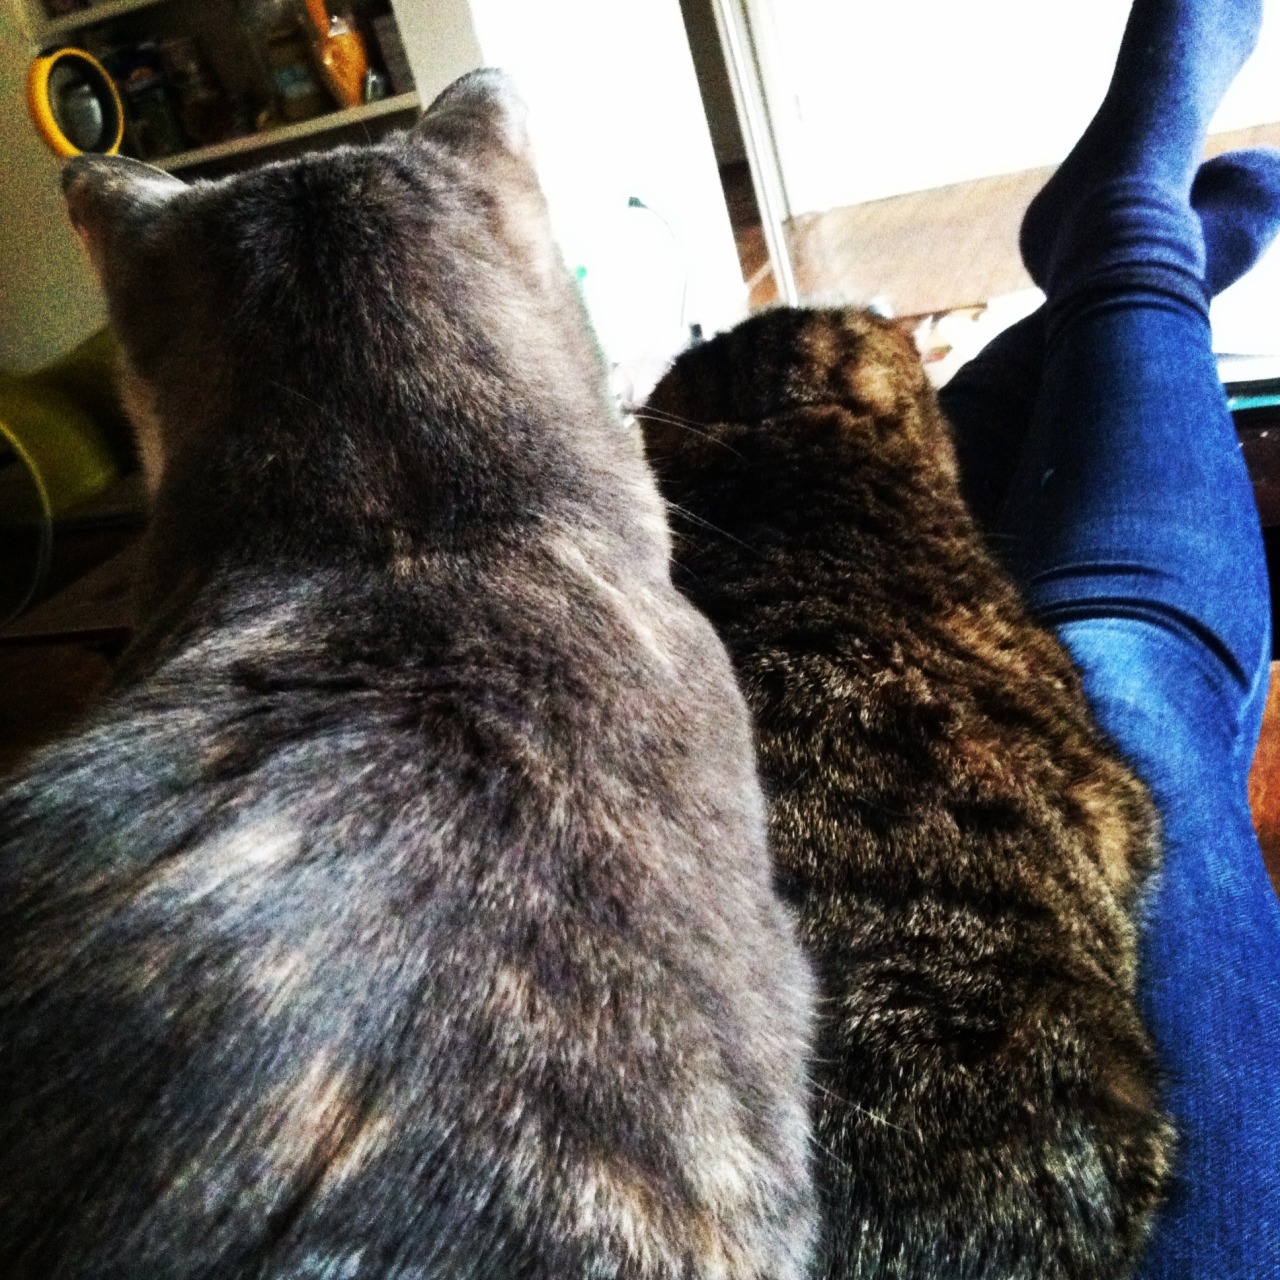 getoutoftherecat:  Both of my cats wanted to sit on my lap at the same time, but